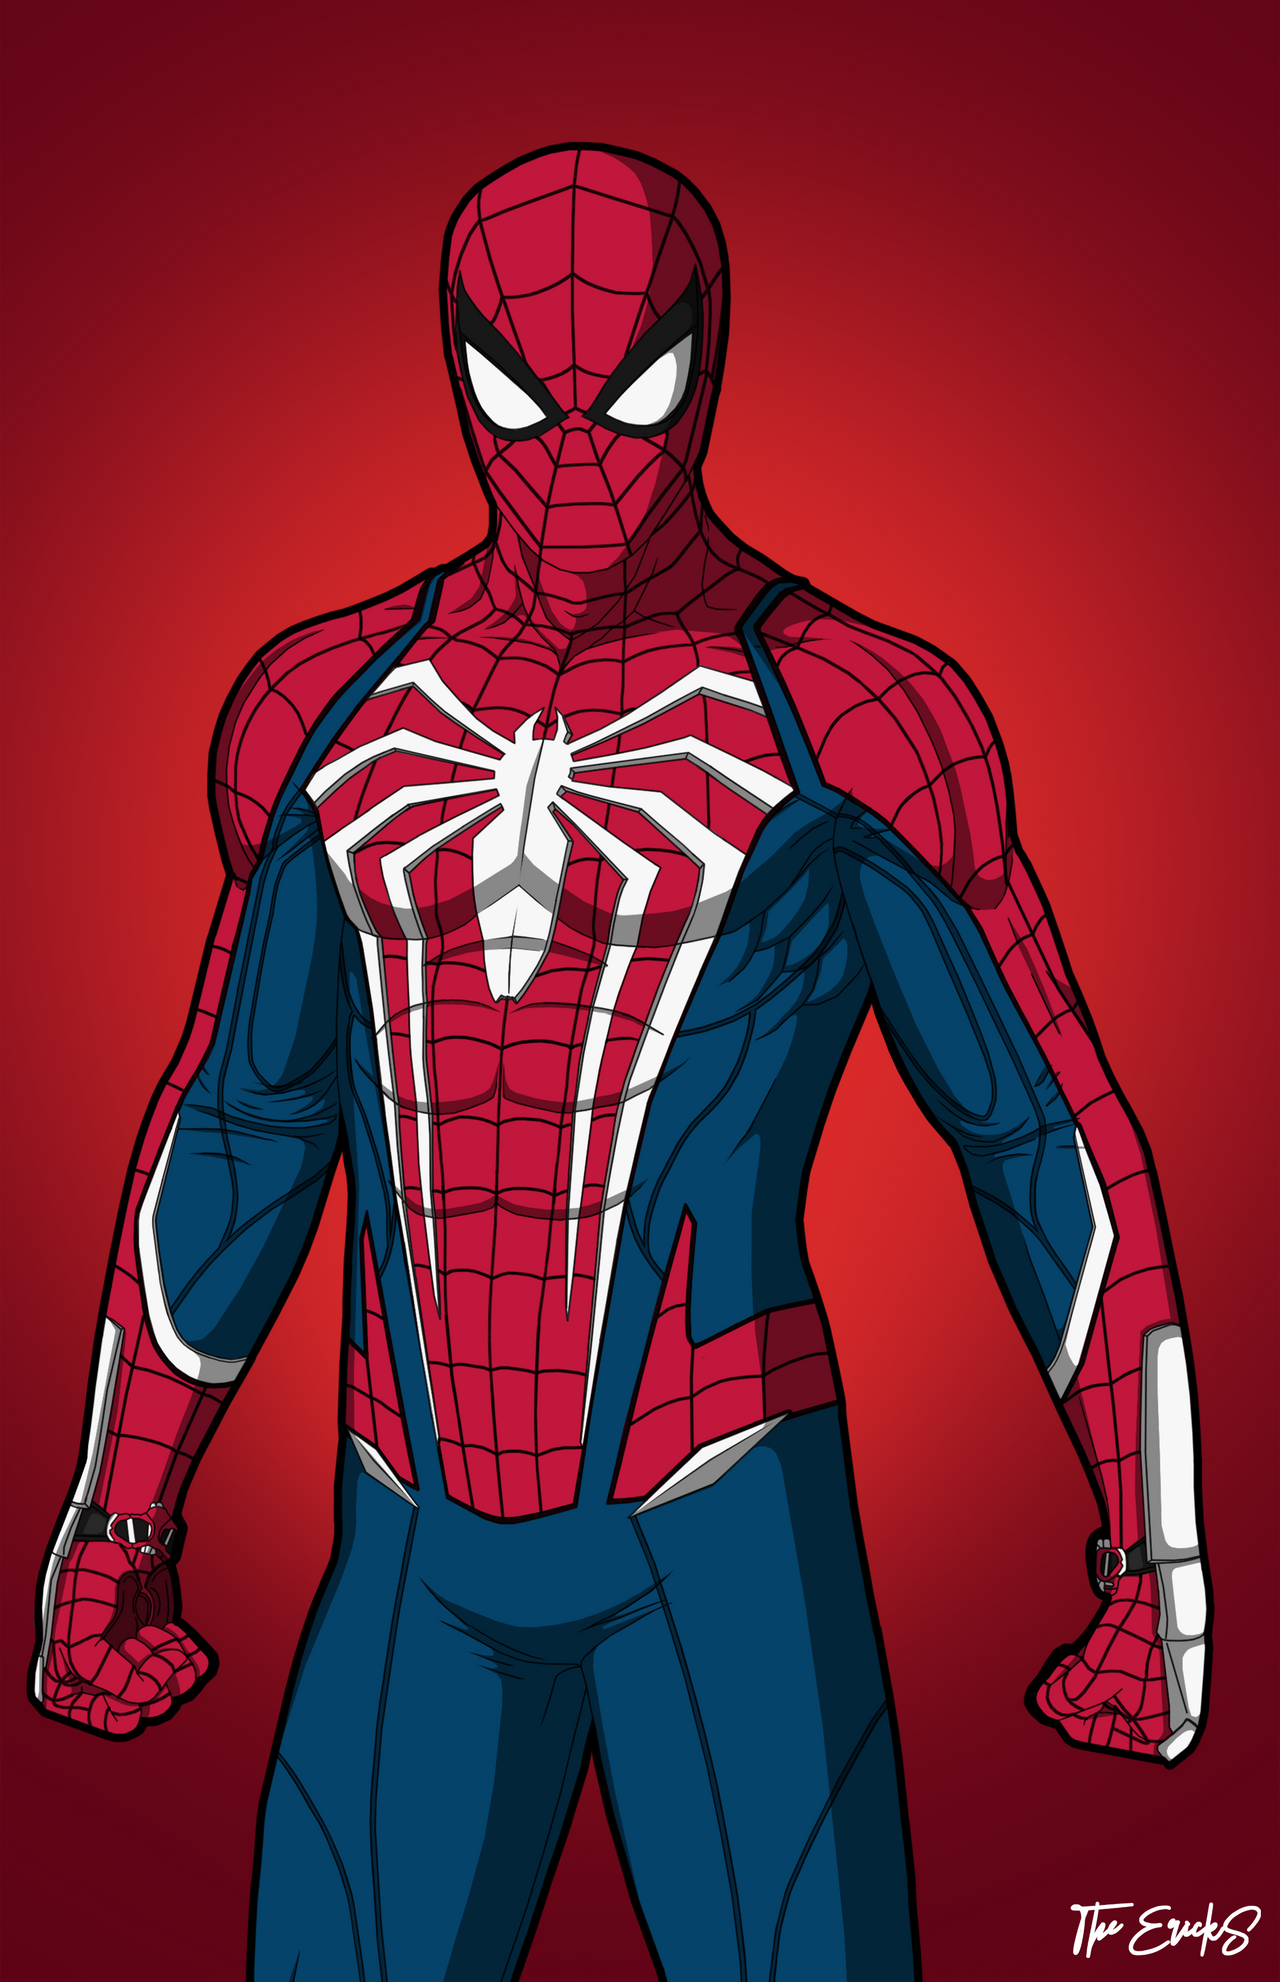 Marvel's Spiderman New Suit PS5 by The ErickS by TheEriiickS on DeviantArt